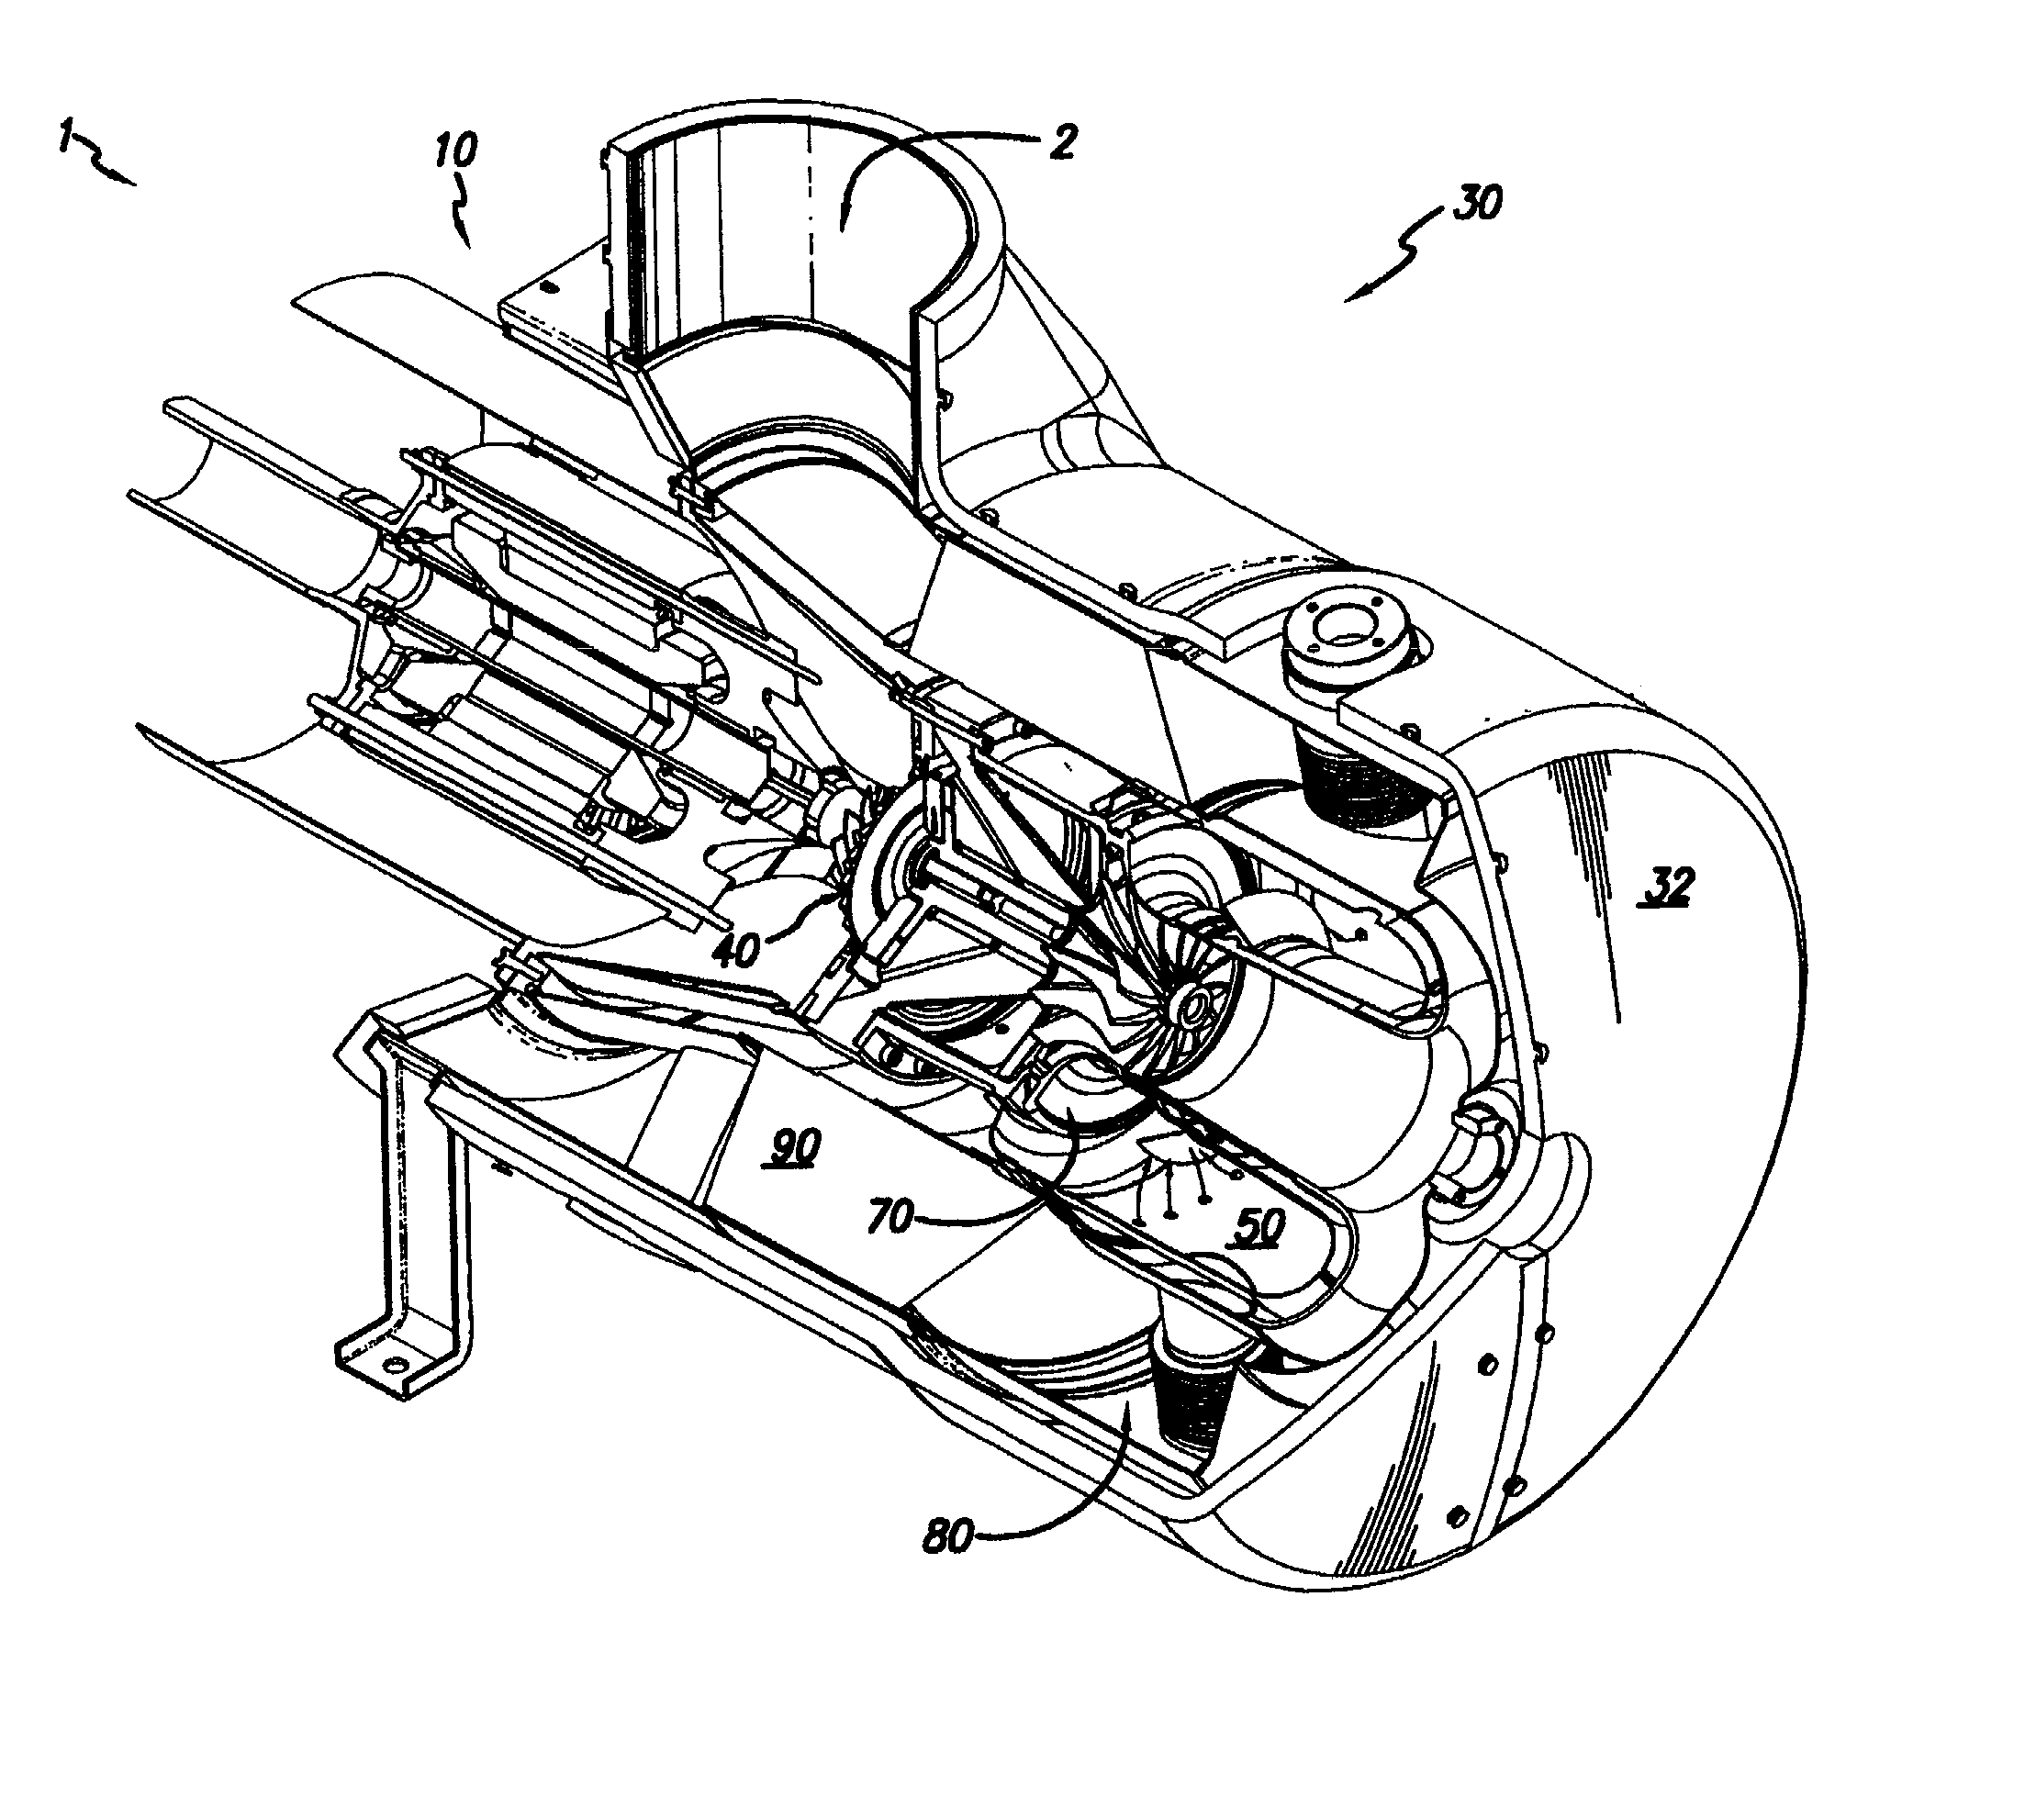 Rotor shield for magnetic rotary machine